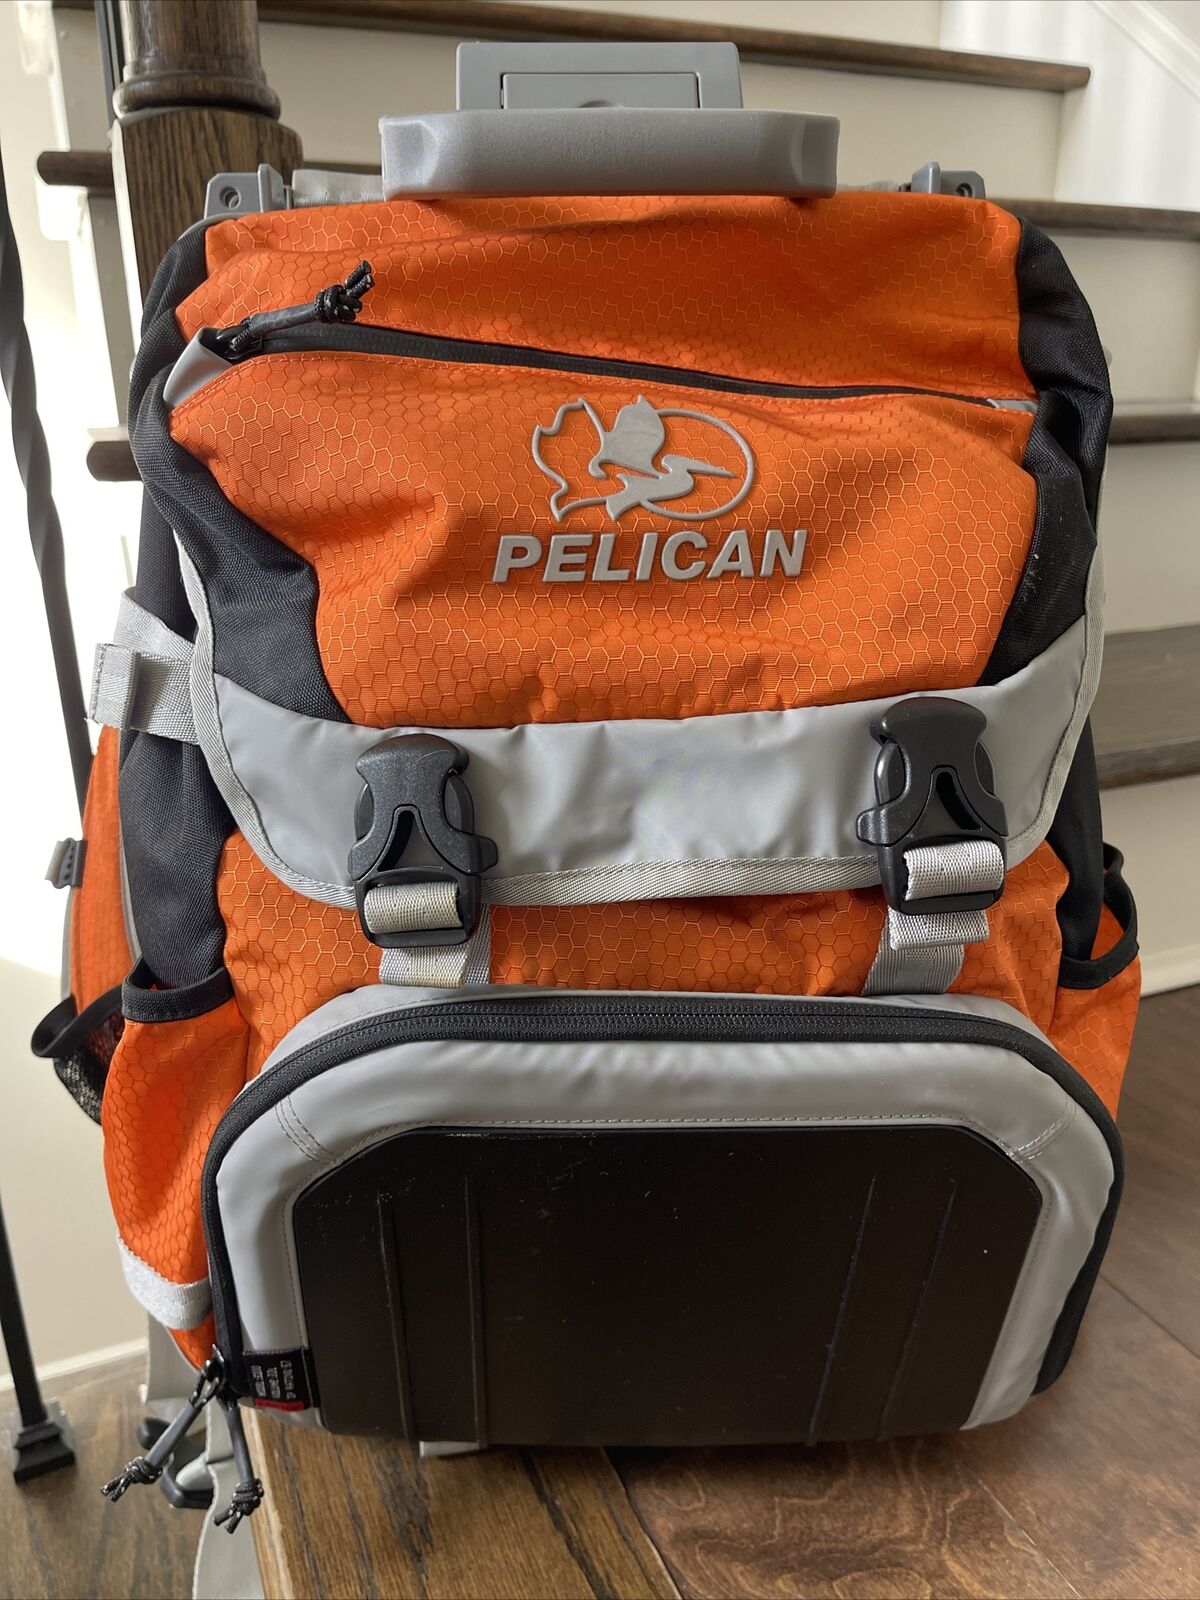 Pelican S100 Sport Elite Laptop Pack With Built In Hard Case Used But Very Clean